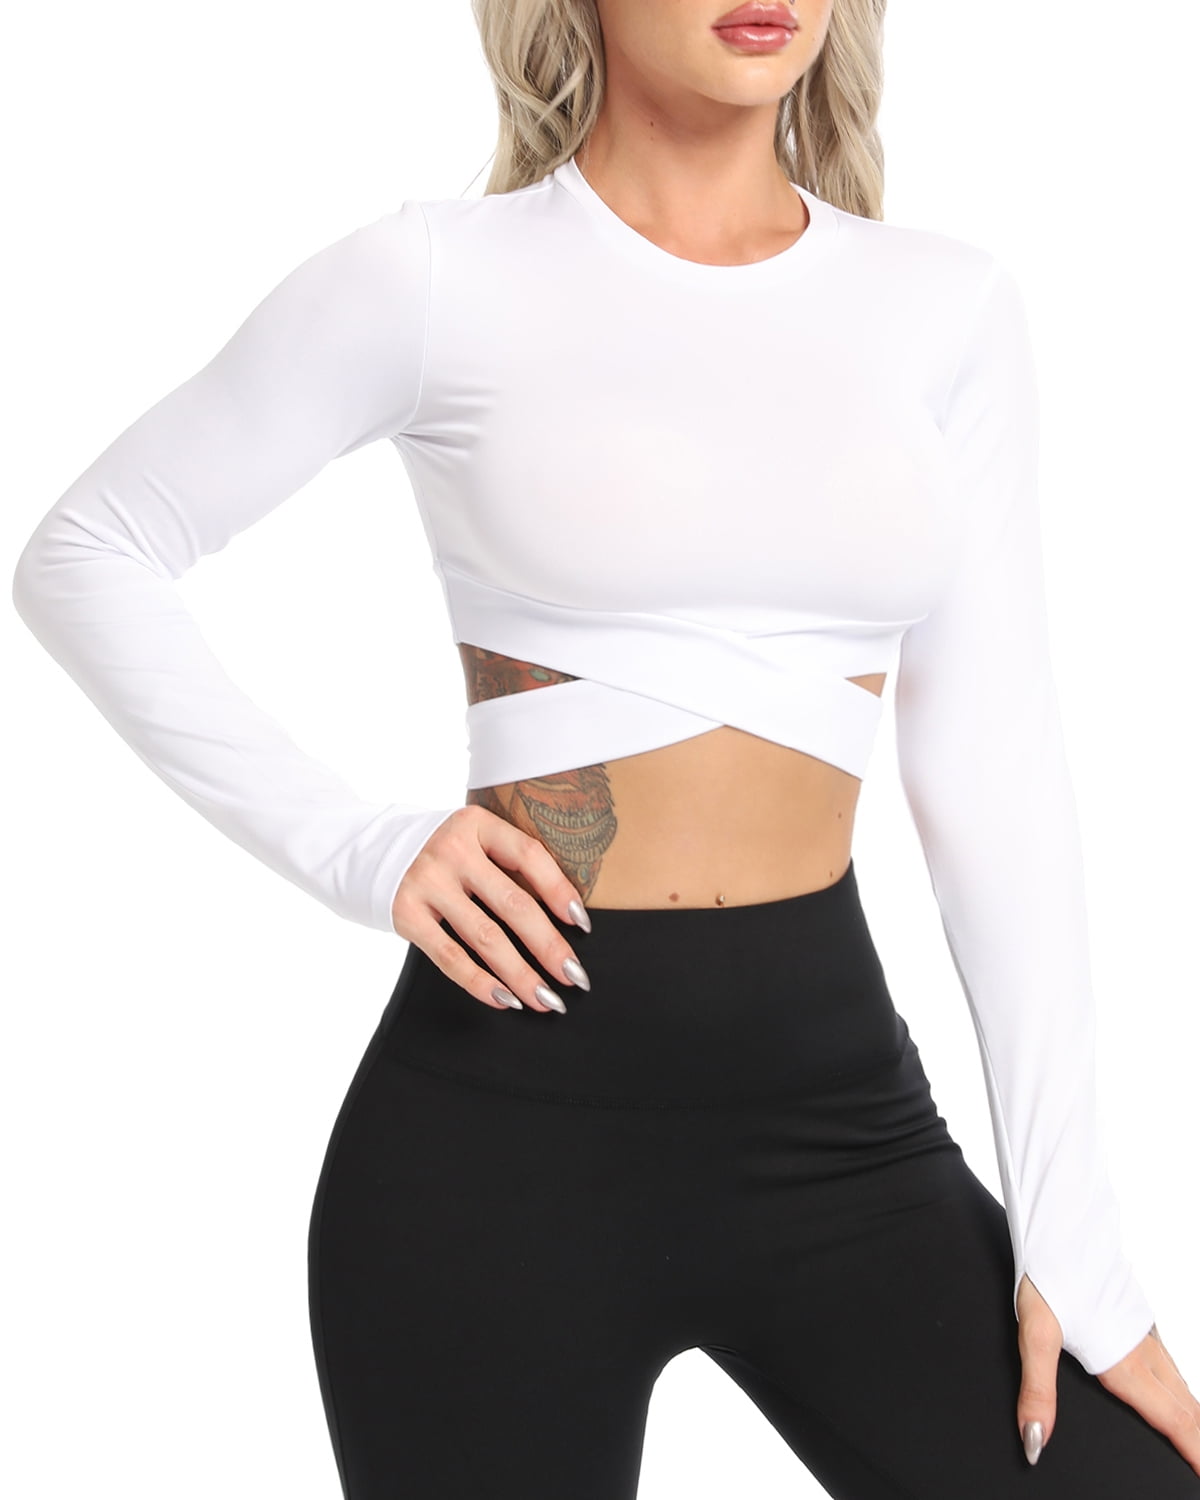 SotRong Womens Seamless Yoga Gym Crop Top Long Sleeve Compression Fitness Workout Running T Shirts with Thumb Hole